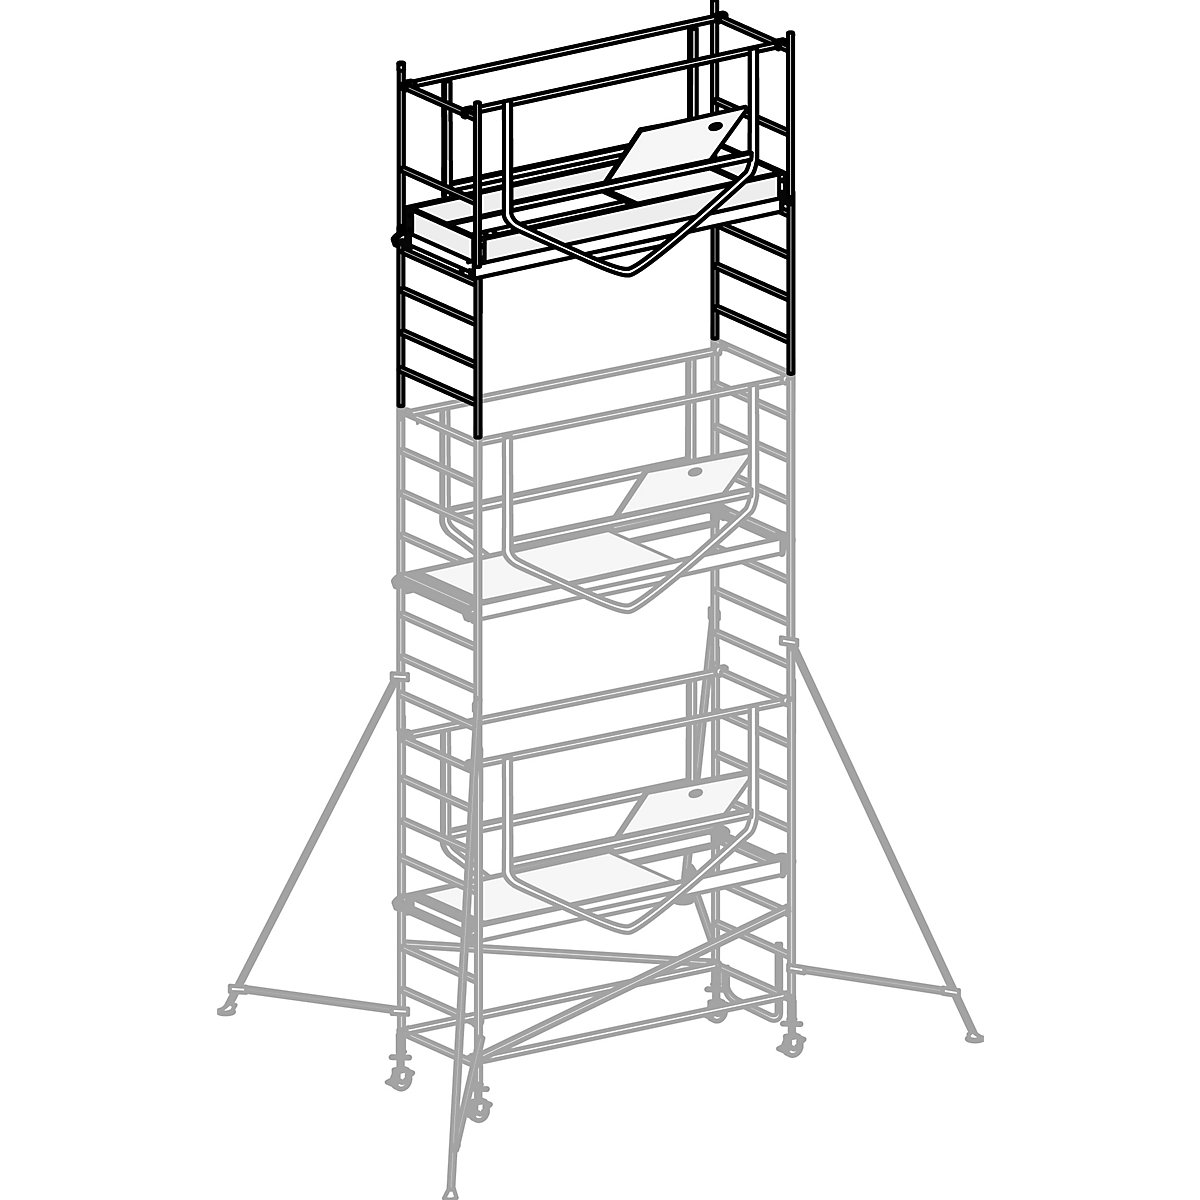 ADVANCED SAFE-T 7070 mobile access tower – HYMER